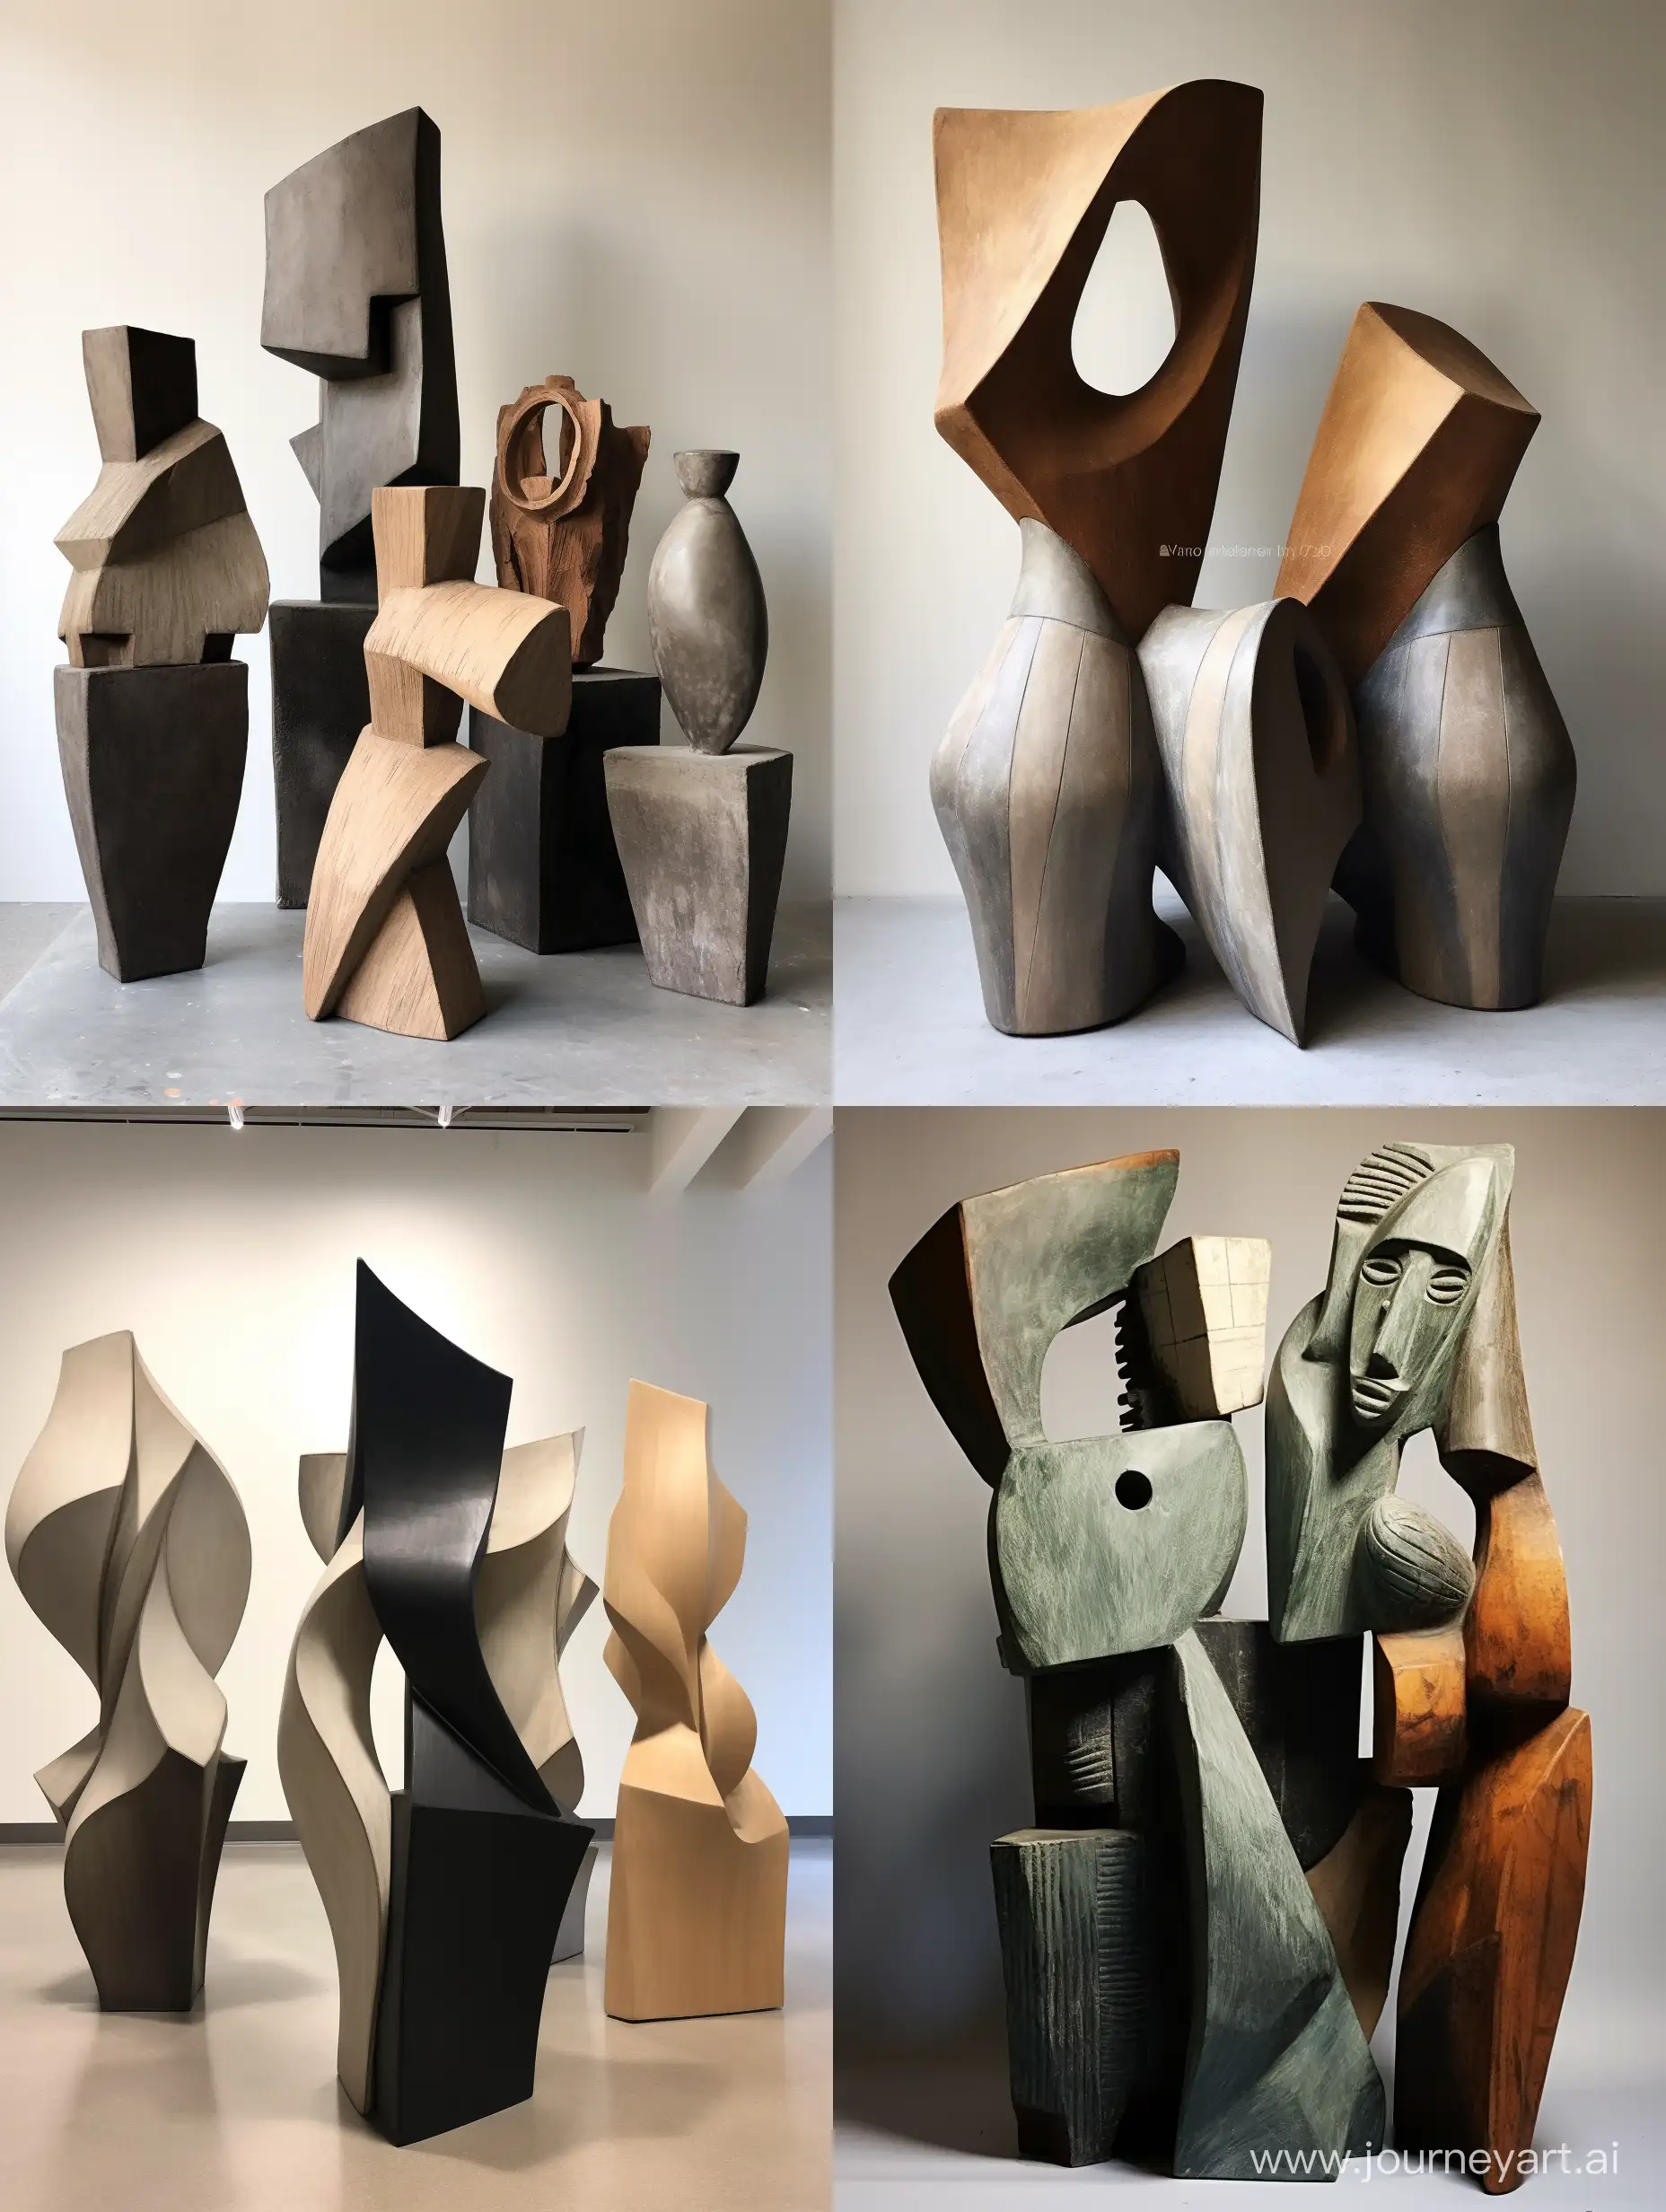 Voluminous-Abstract-Geometric-Ceramic-Sculpture-Inspired-by-60s-Style